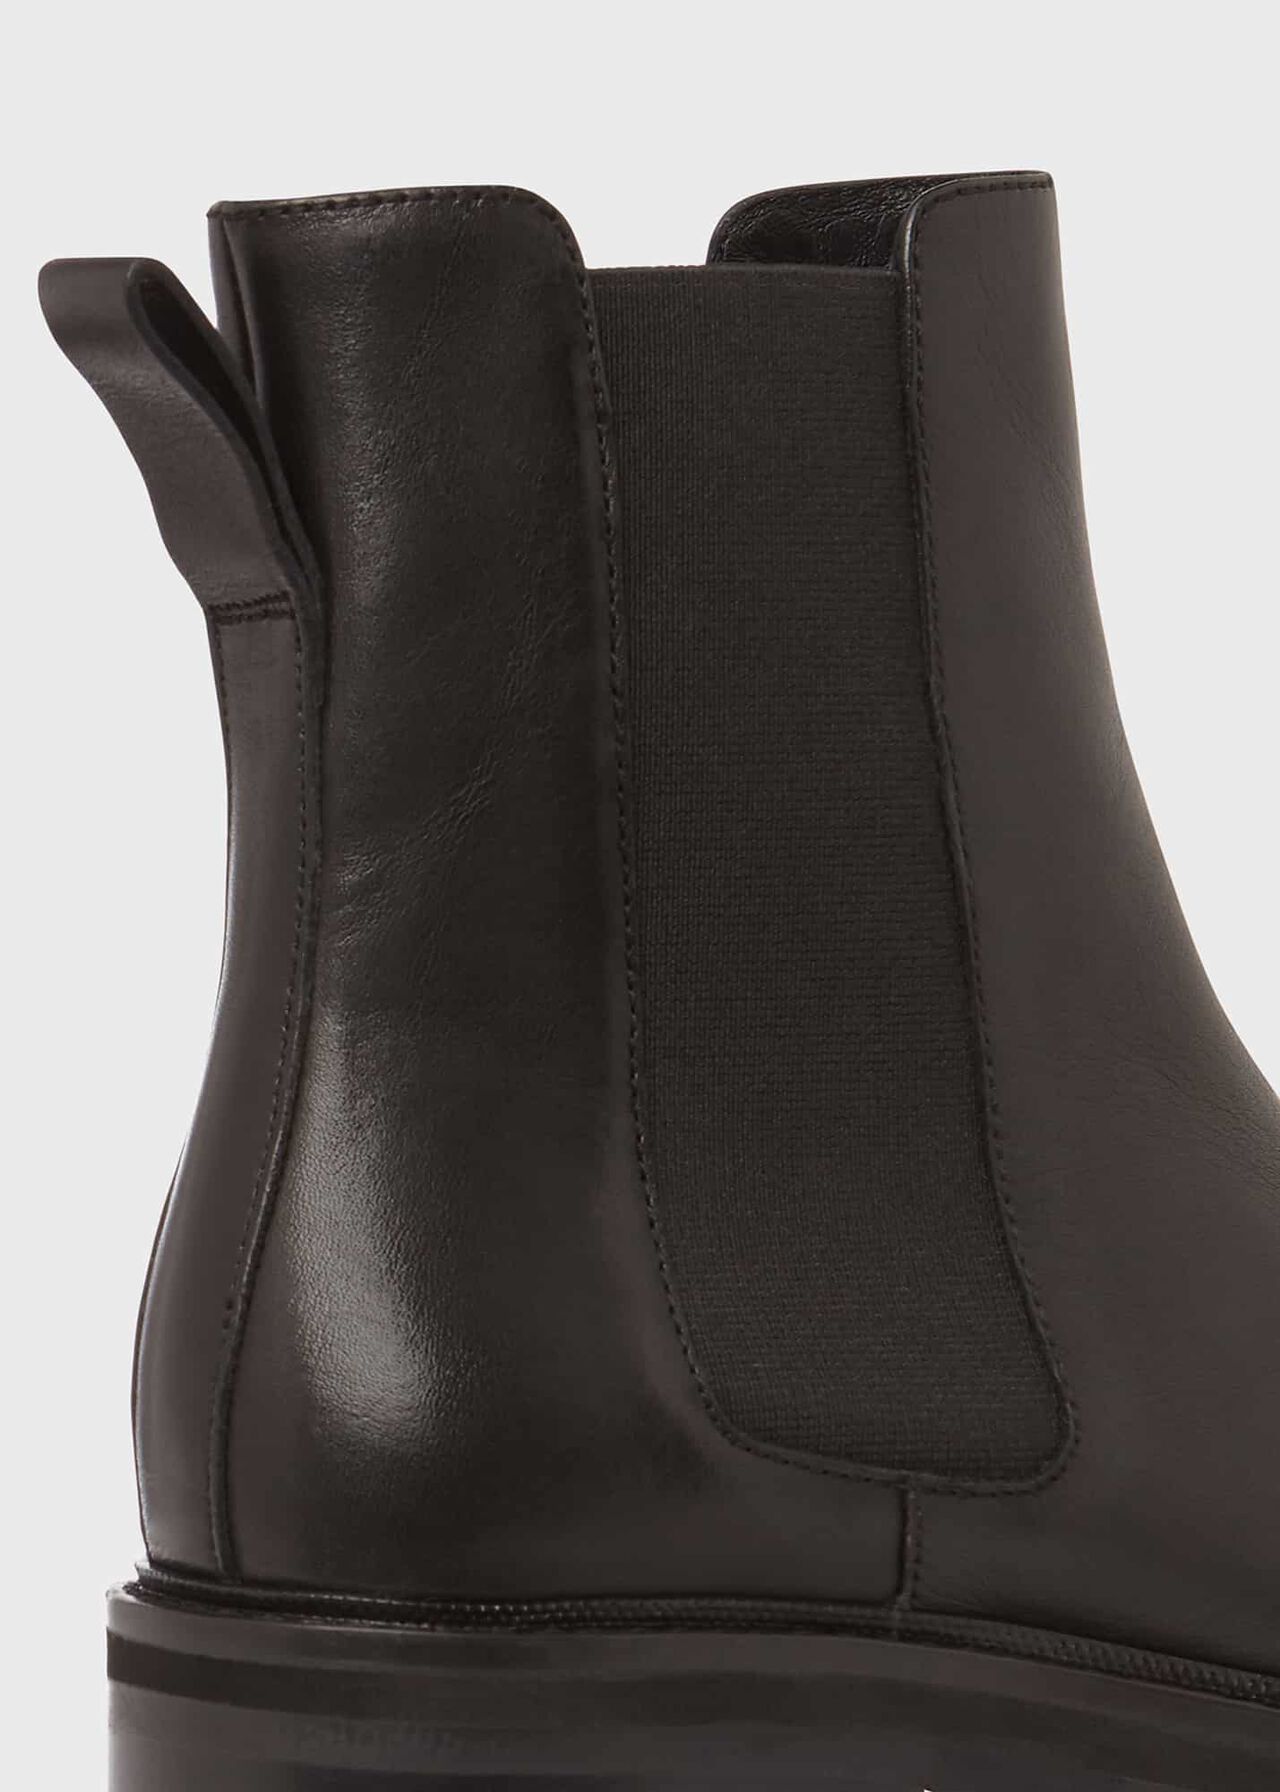 Marian Ankle Boot, Black, hi-res